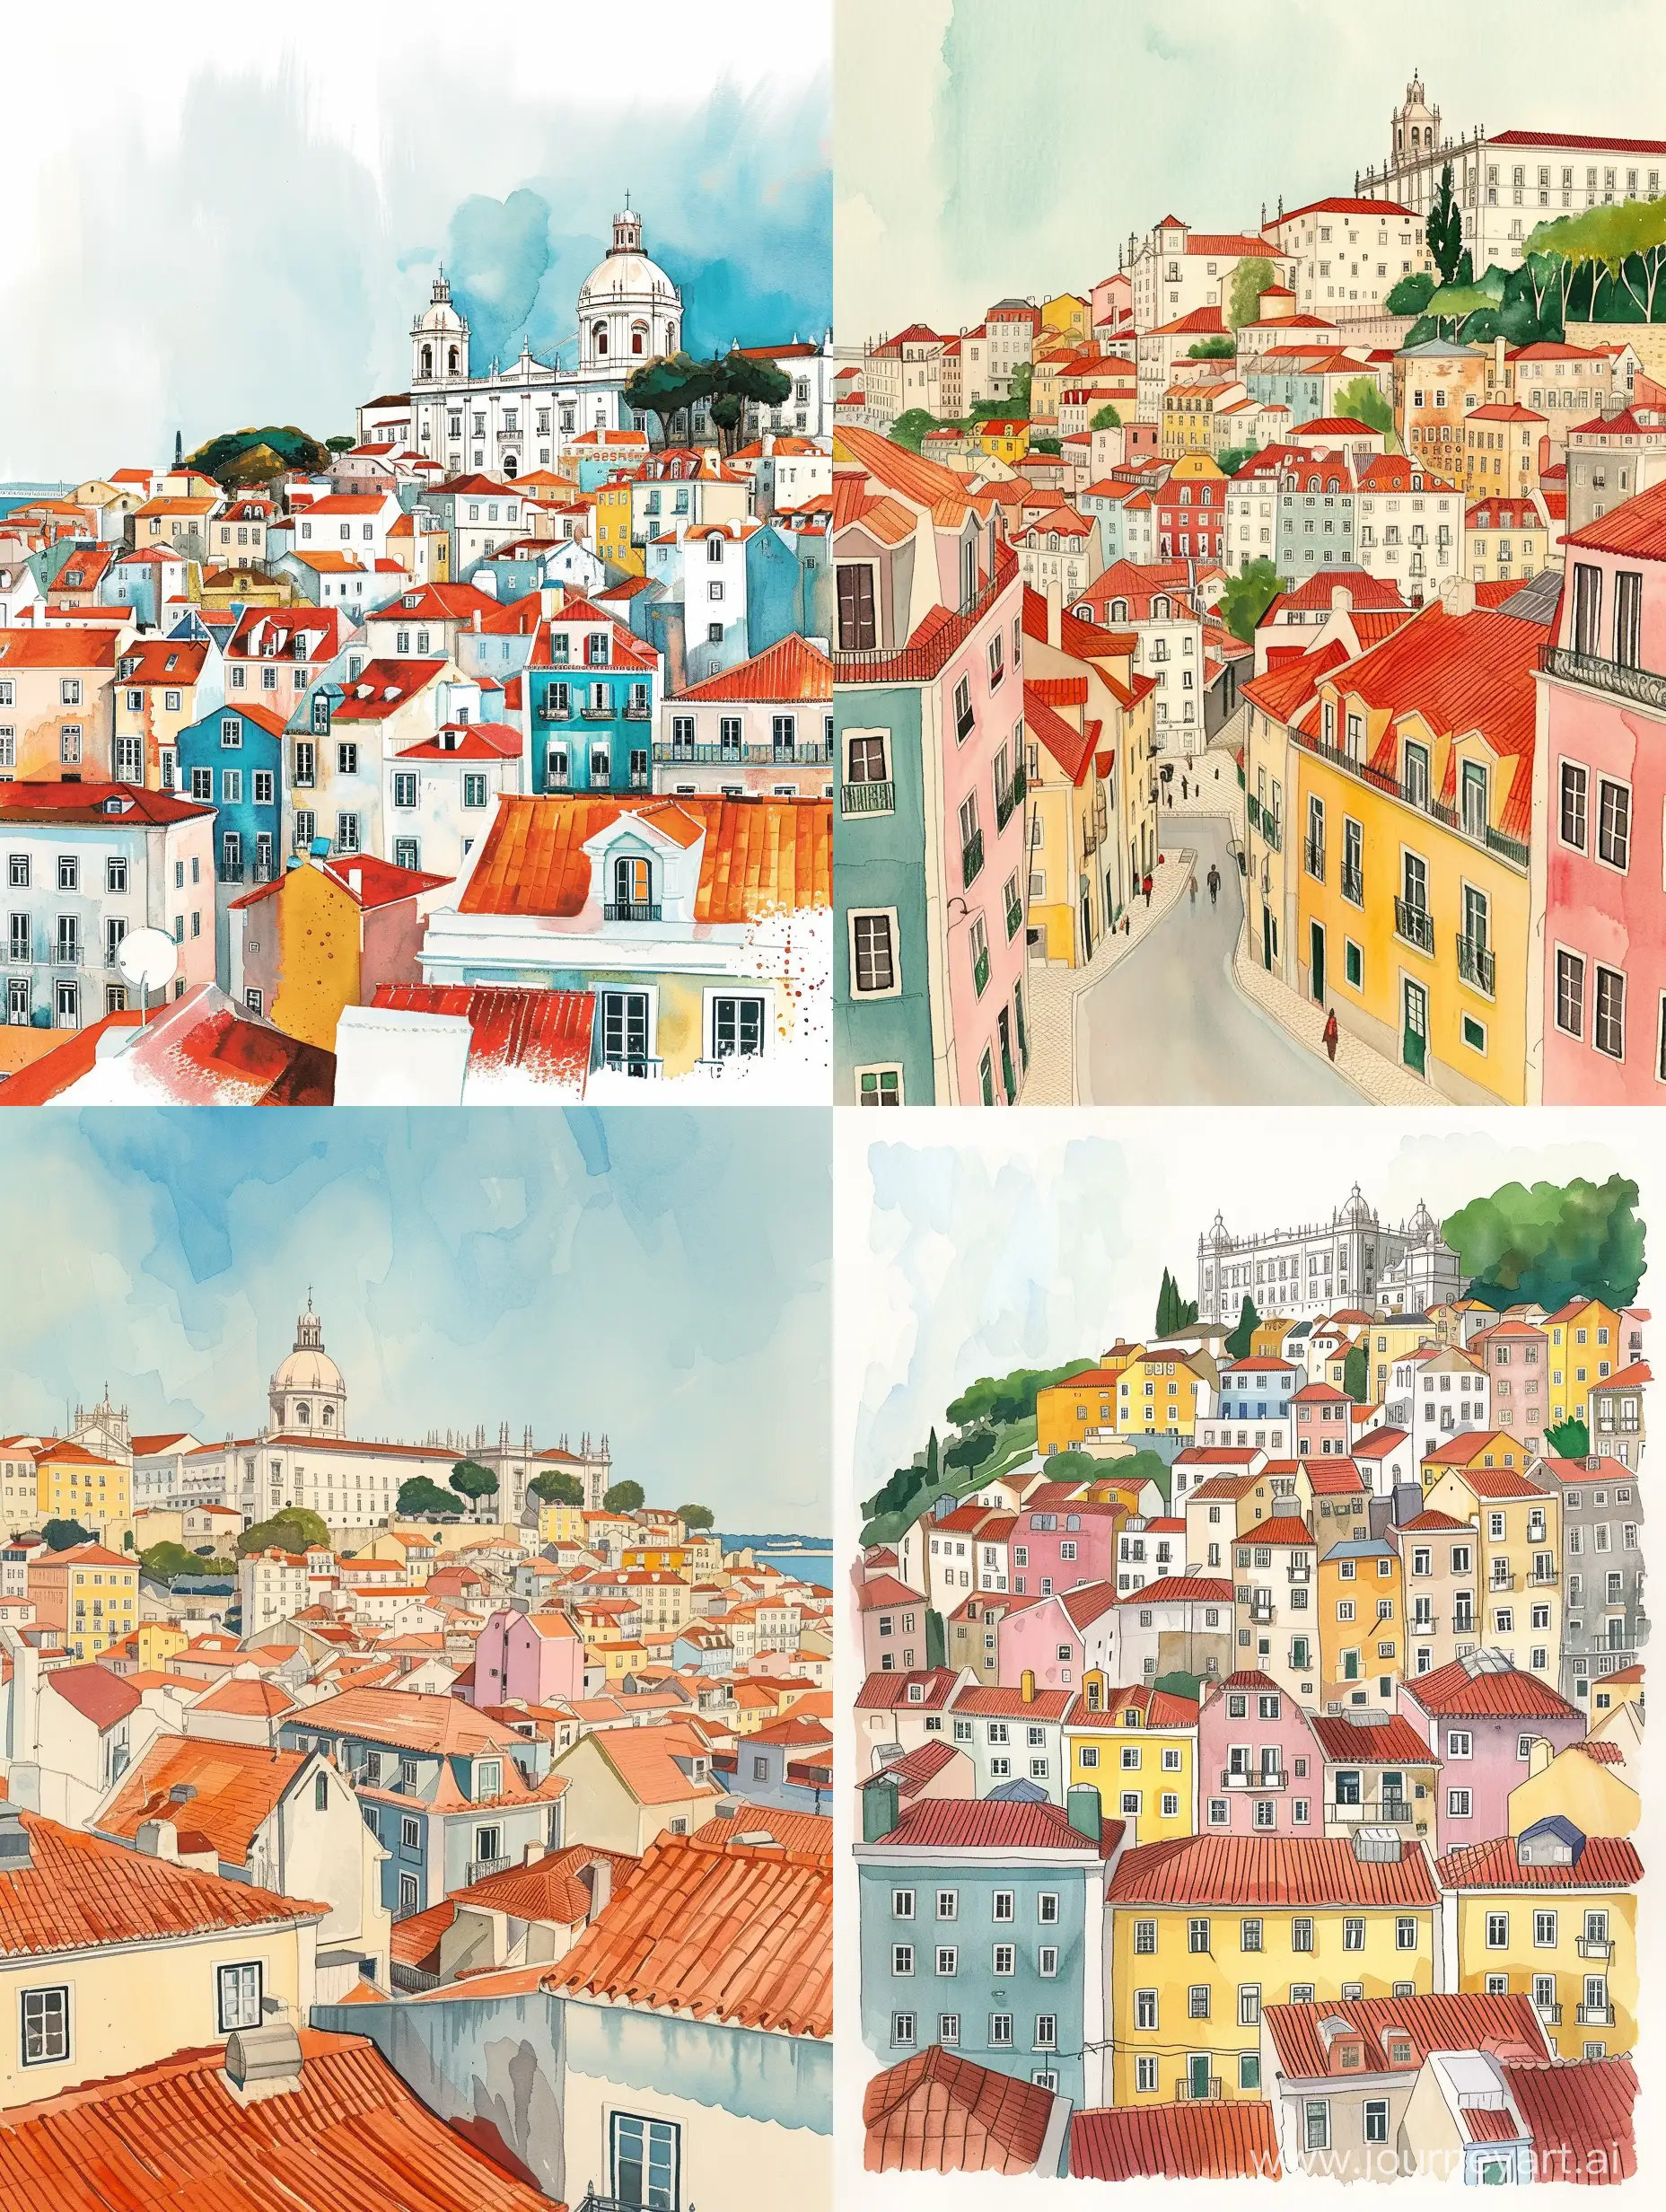 The city of Lisbon, an illustration for a vintage magazine with watercolor paints